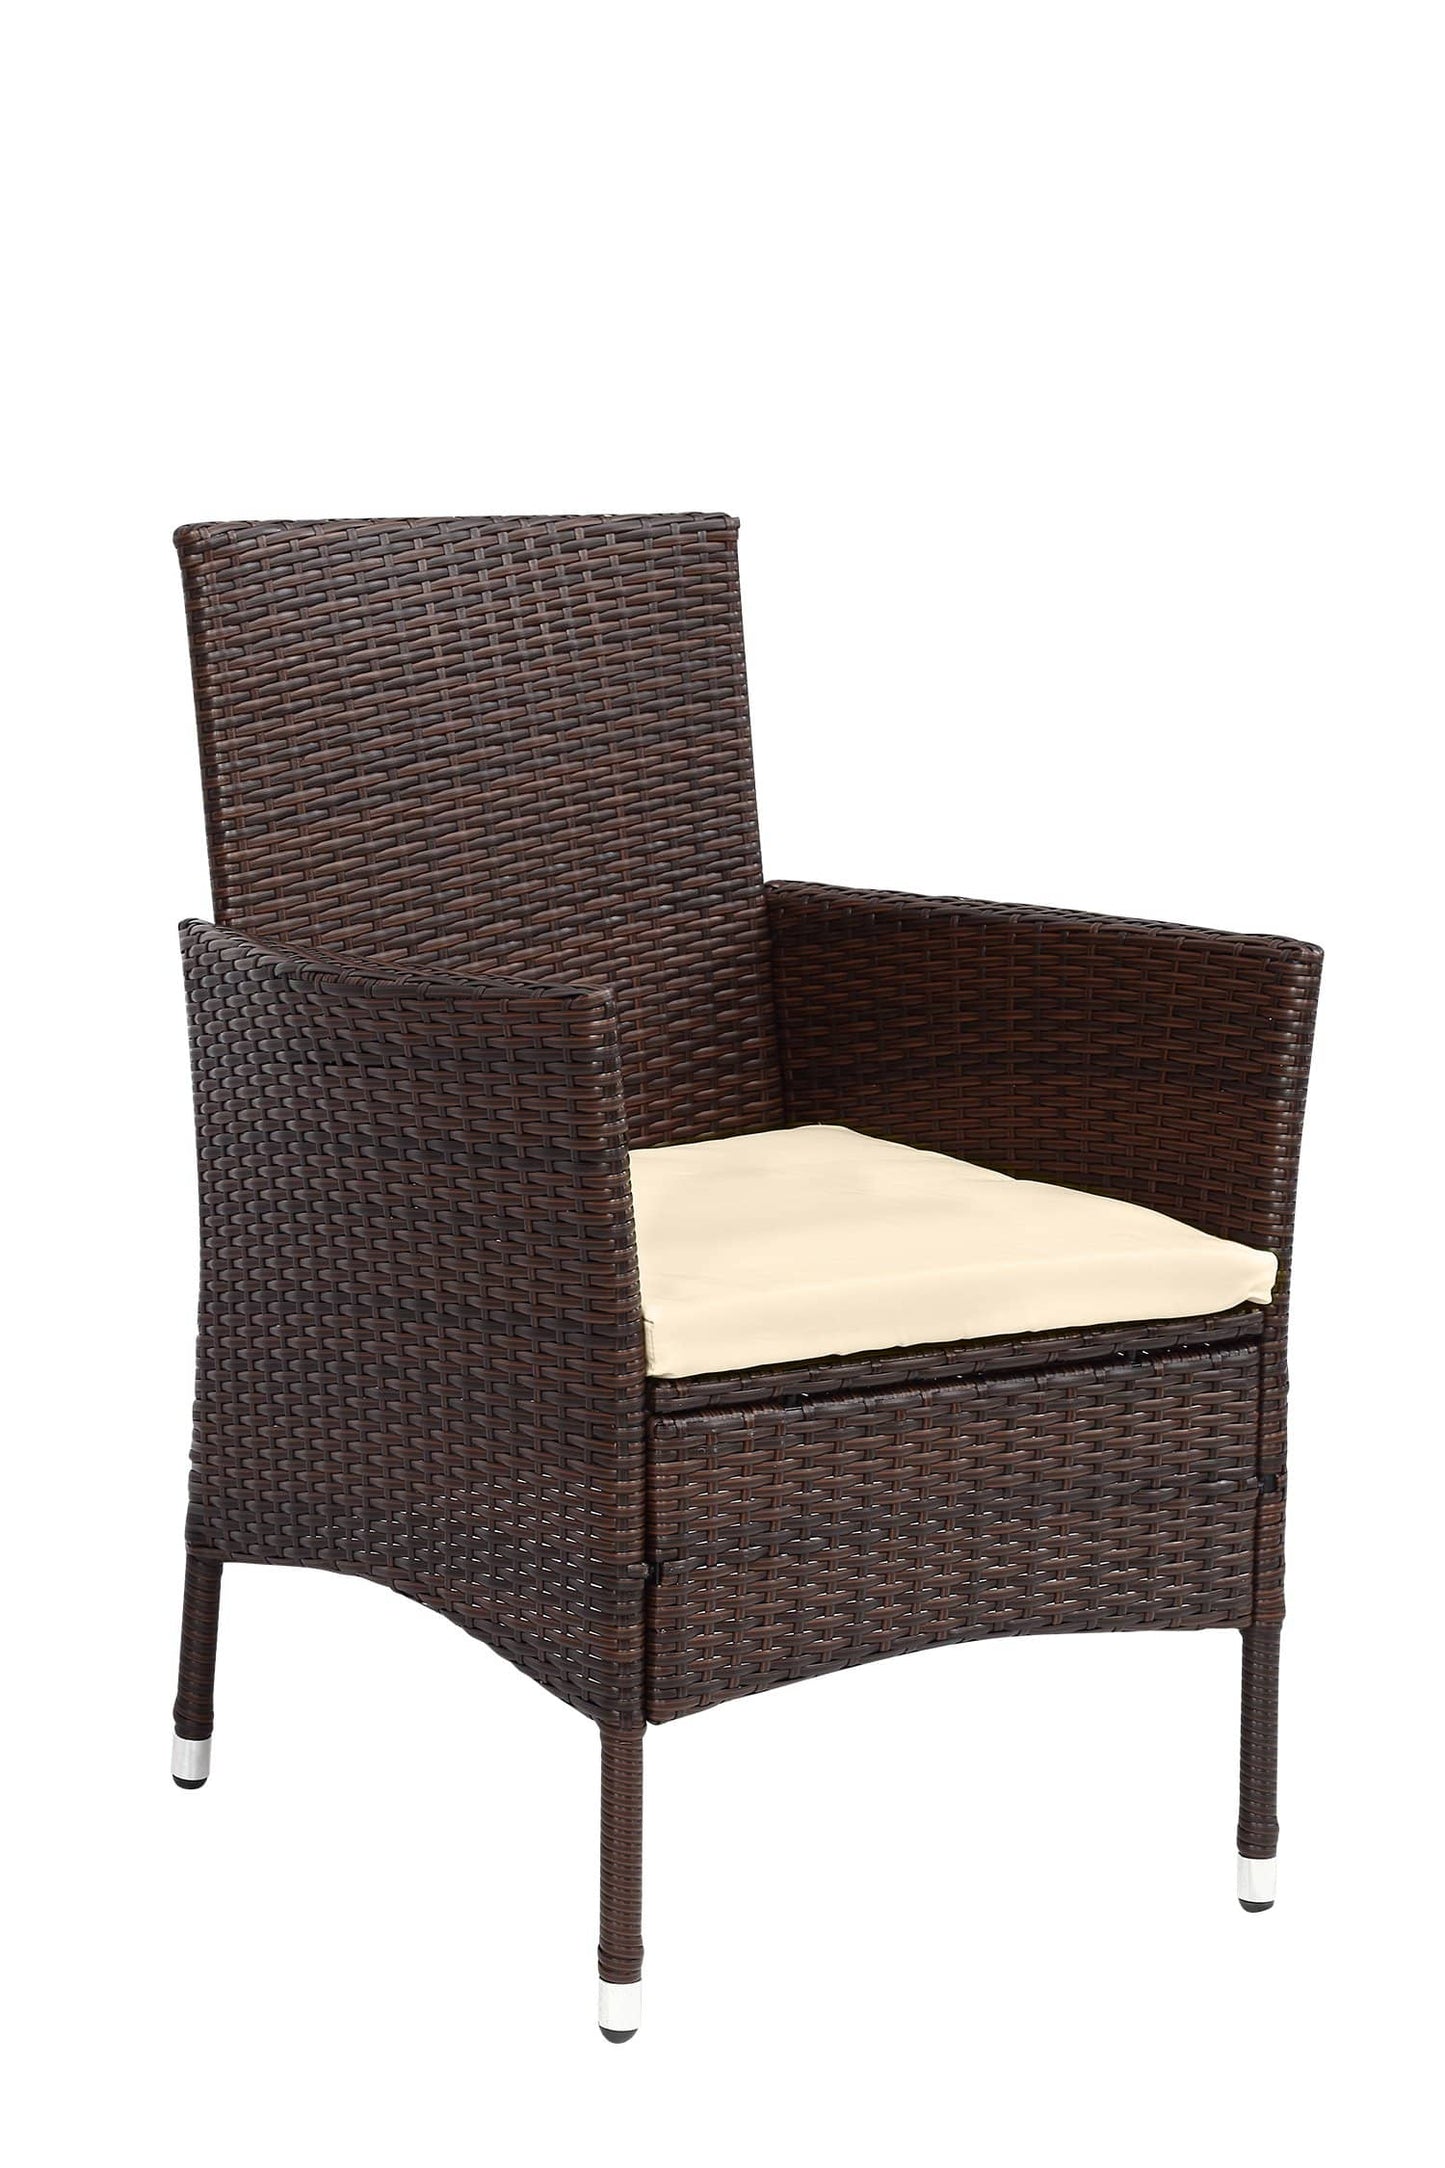 Context Penta 5 Piece All Weather Wicker Outdoor Dining Set